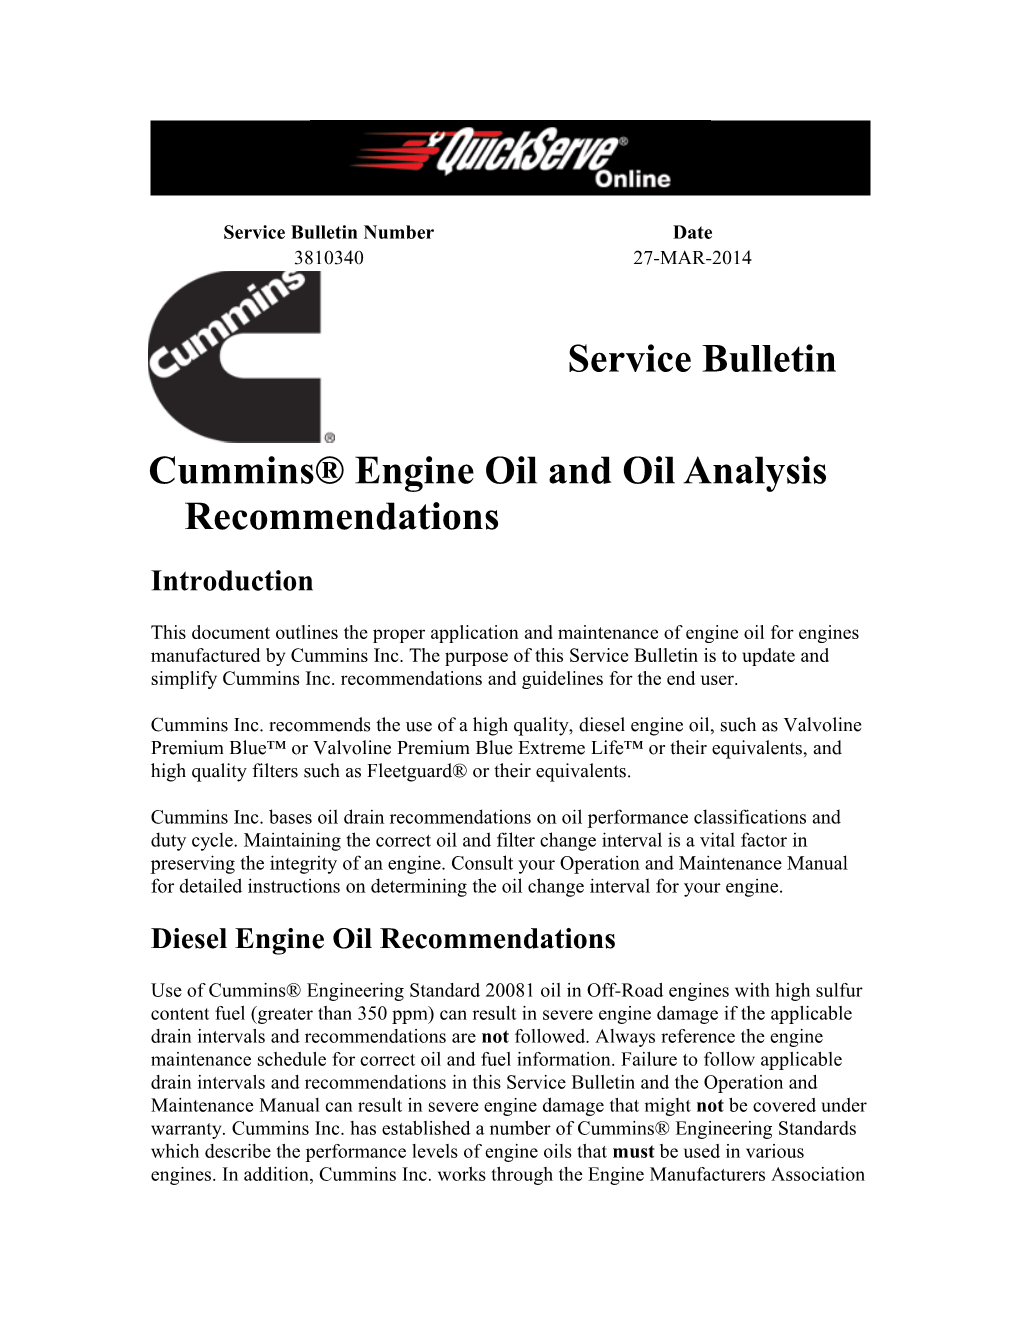 Cummins Engine Oil and Oil Analysis Recommendations